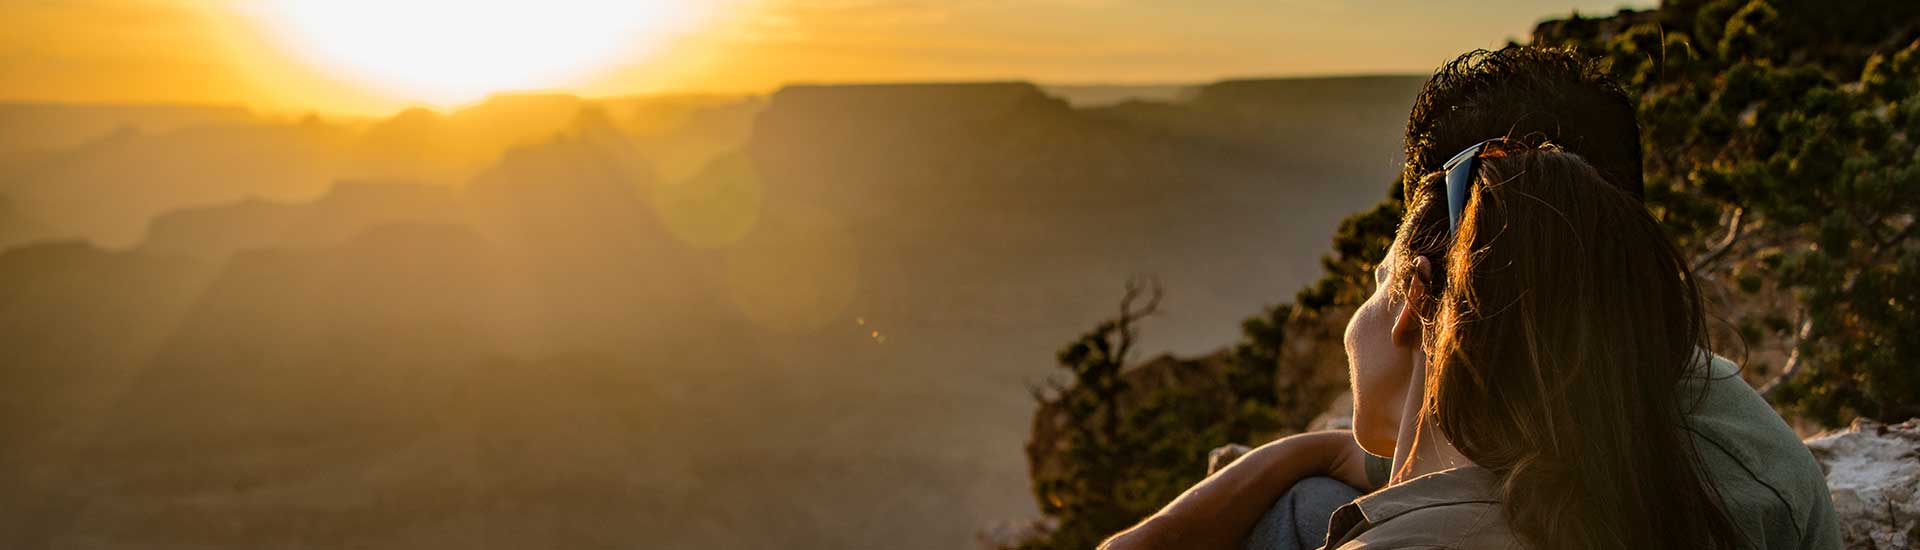 Girl looking out at a golden sun setting behind the jagged rock formations along the Grand Canyon's South Rim.